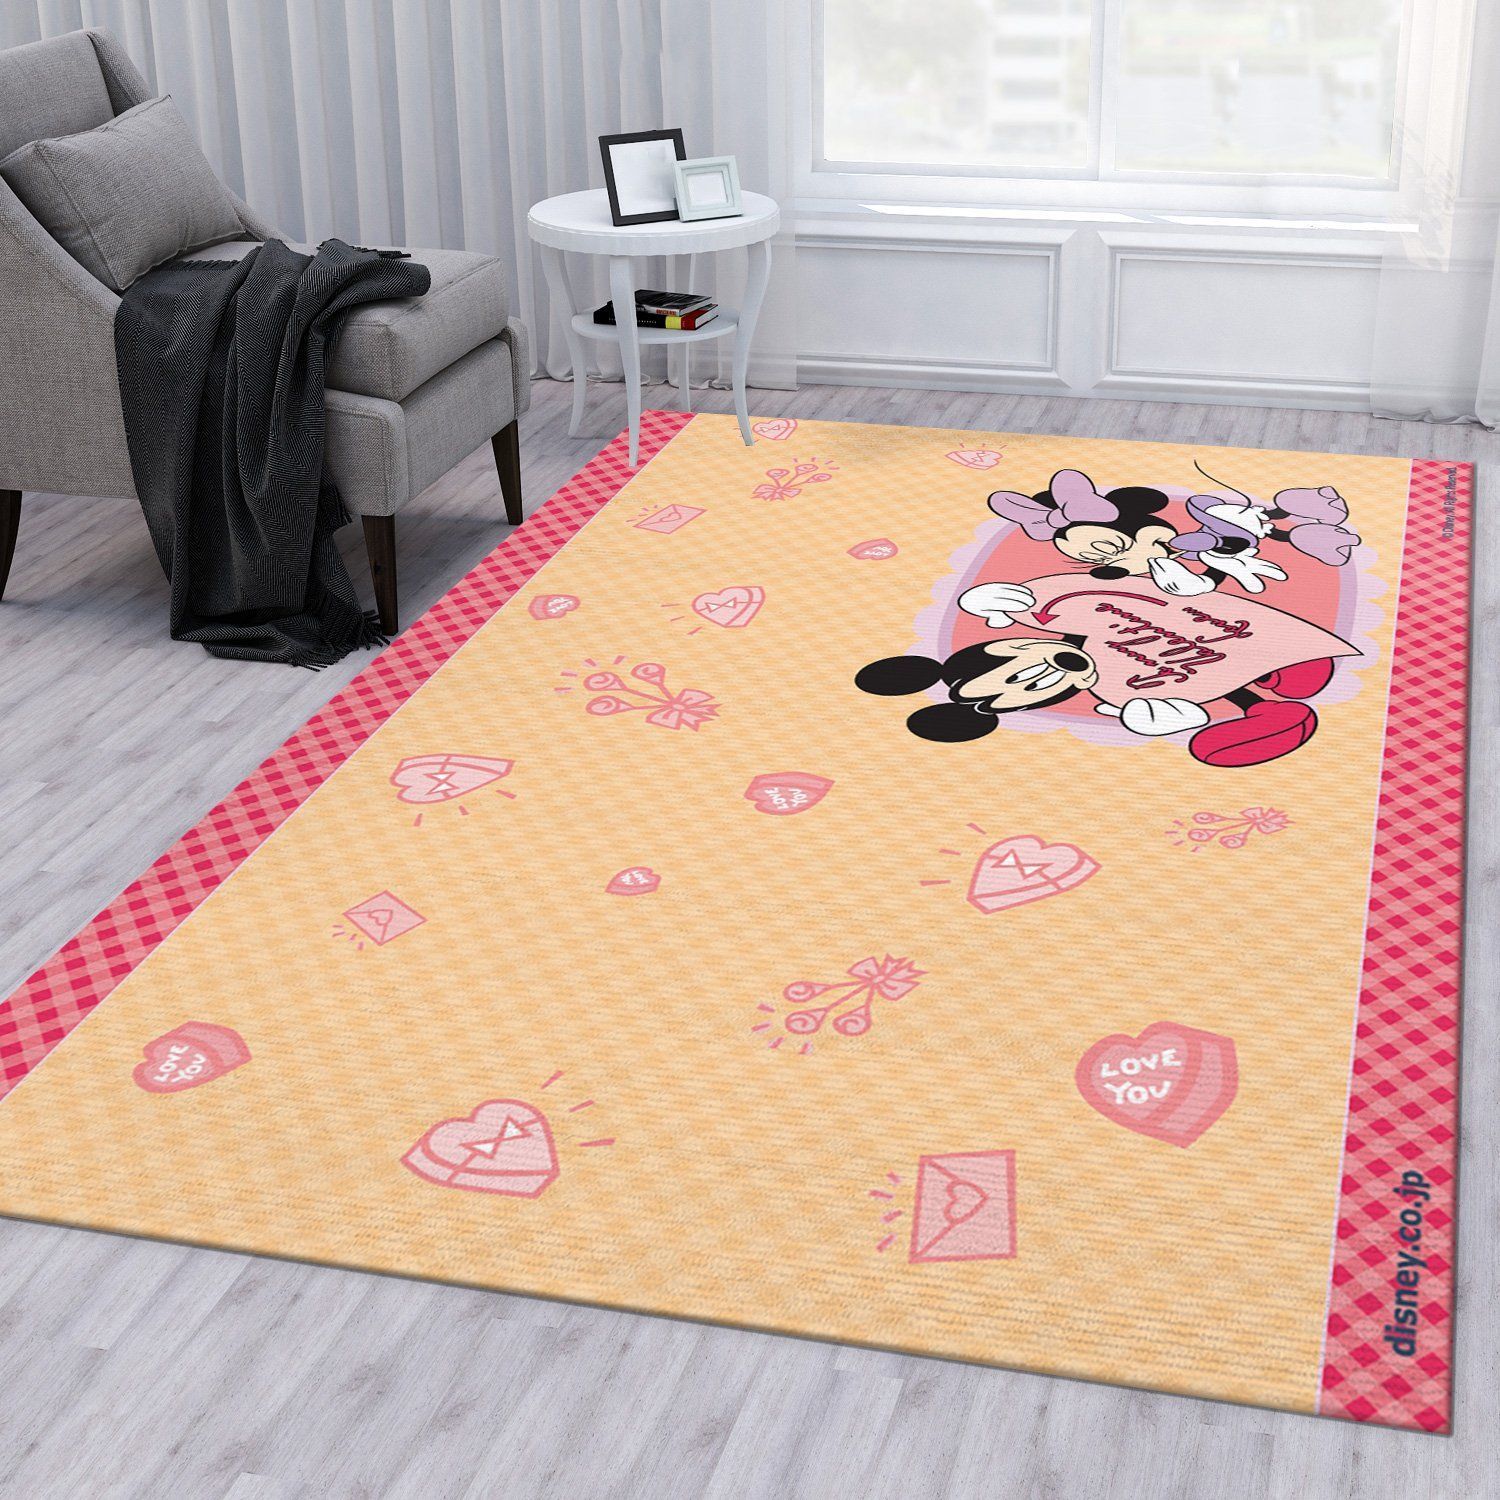 Minnie Mouse Ver10 Area Rug For Christmas Bedroom Rug Christmas Gift US Decor - Indoor Outdoor Rugs